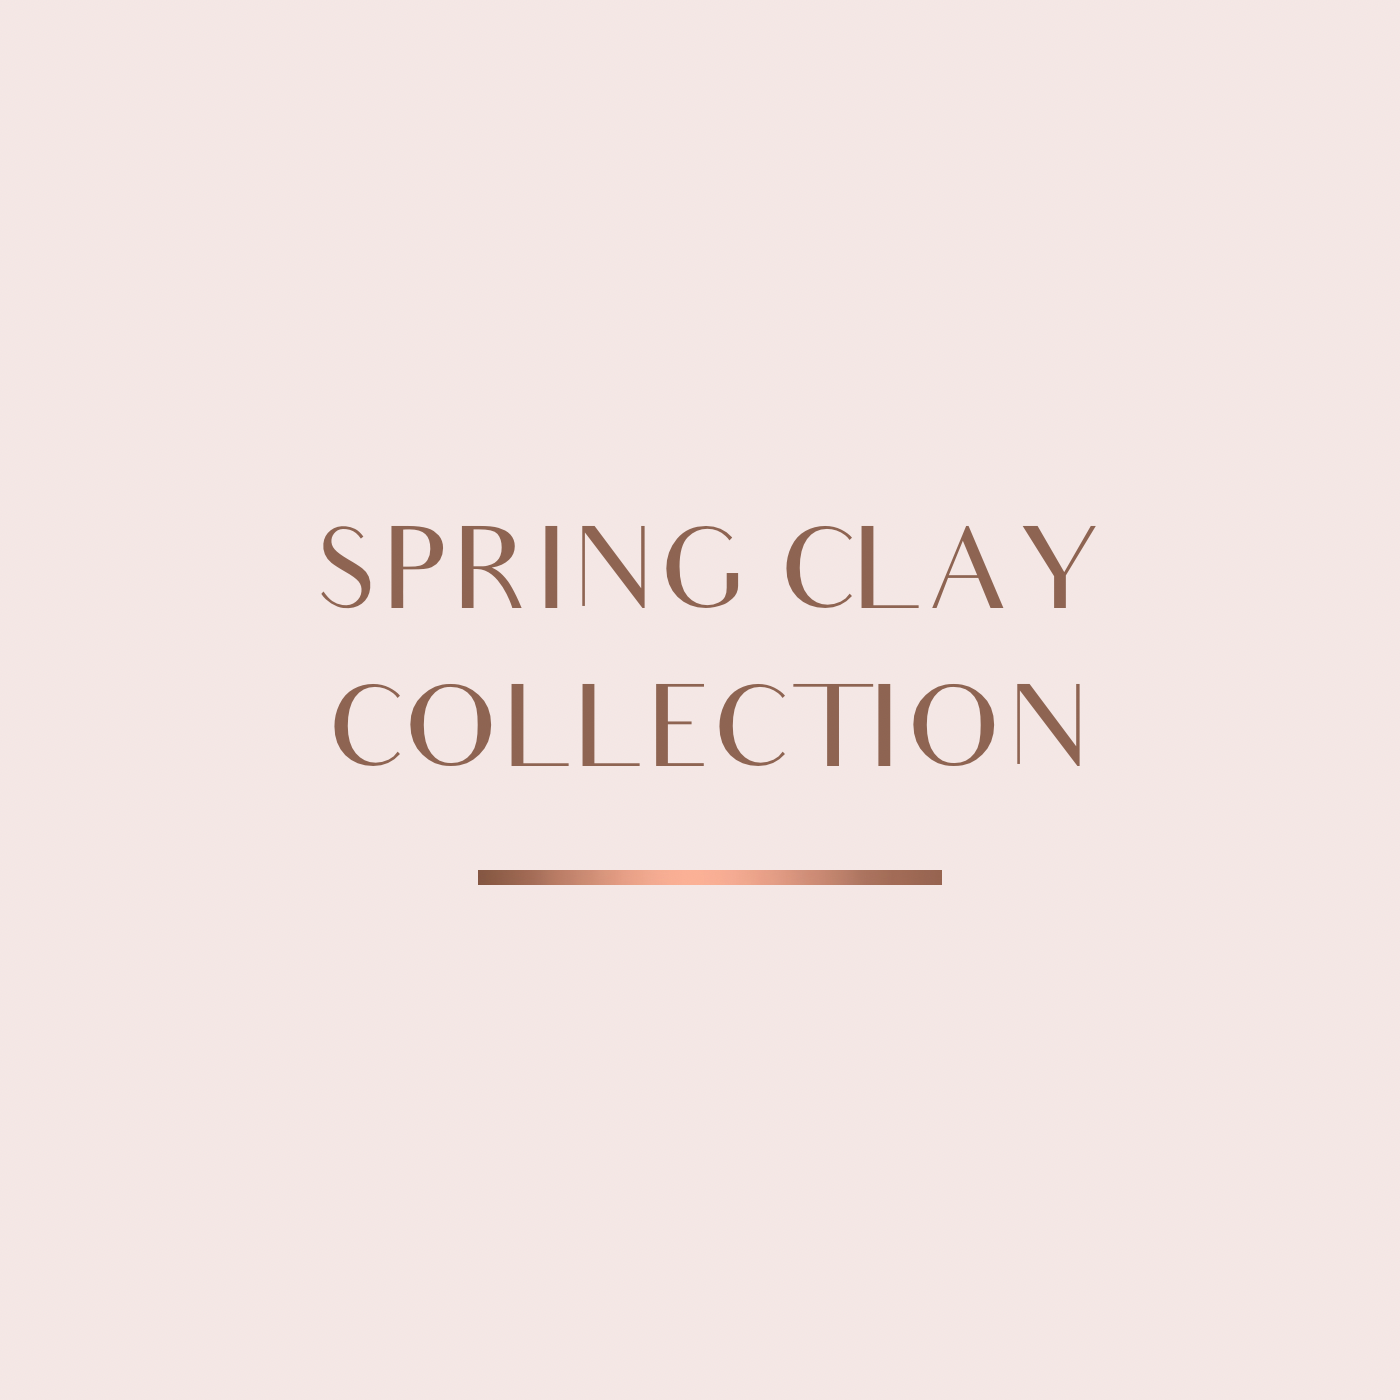 SPRING CLAY COLLECTION